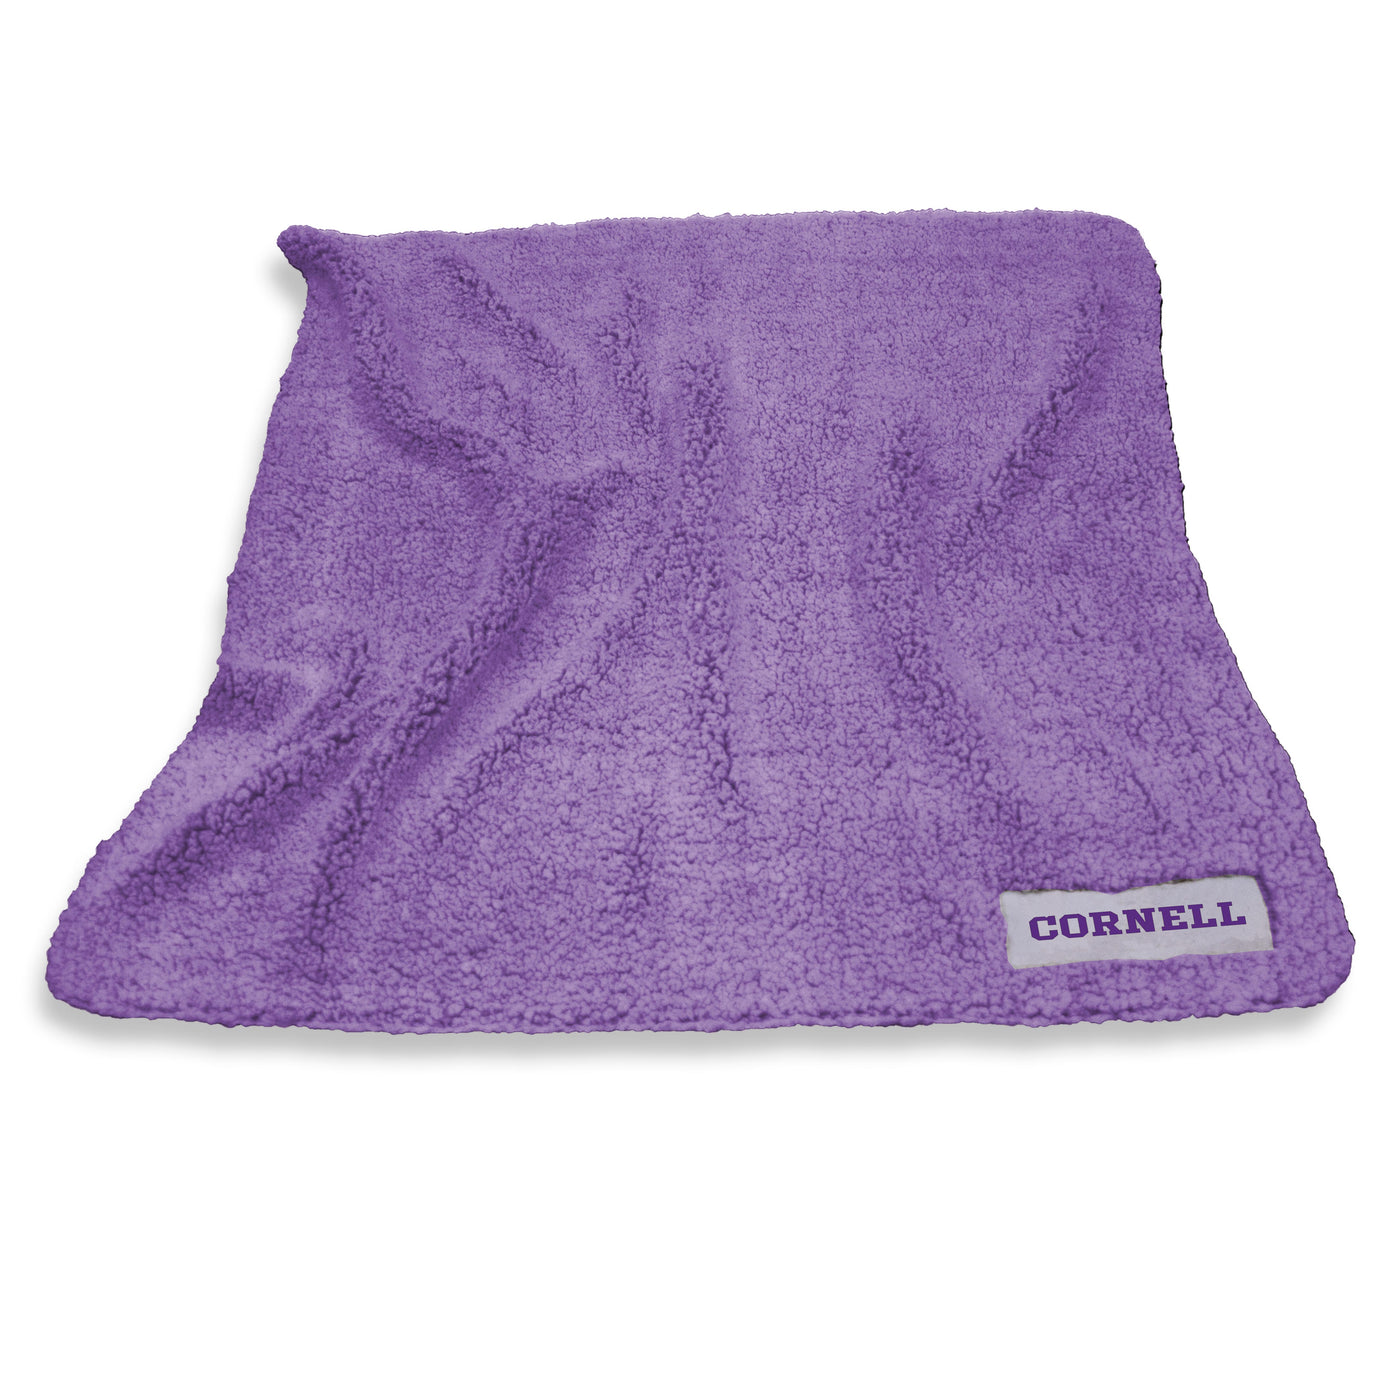 Cornell College Color Frosty Fleece